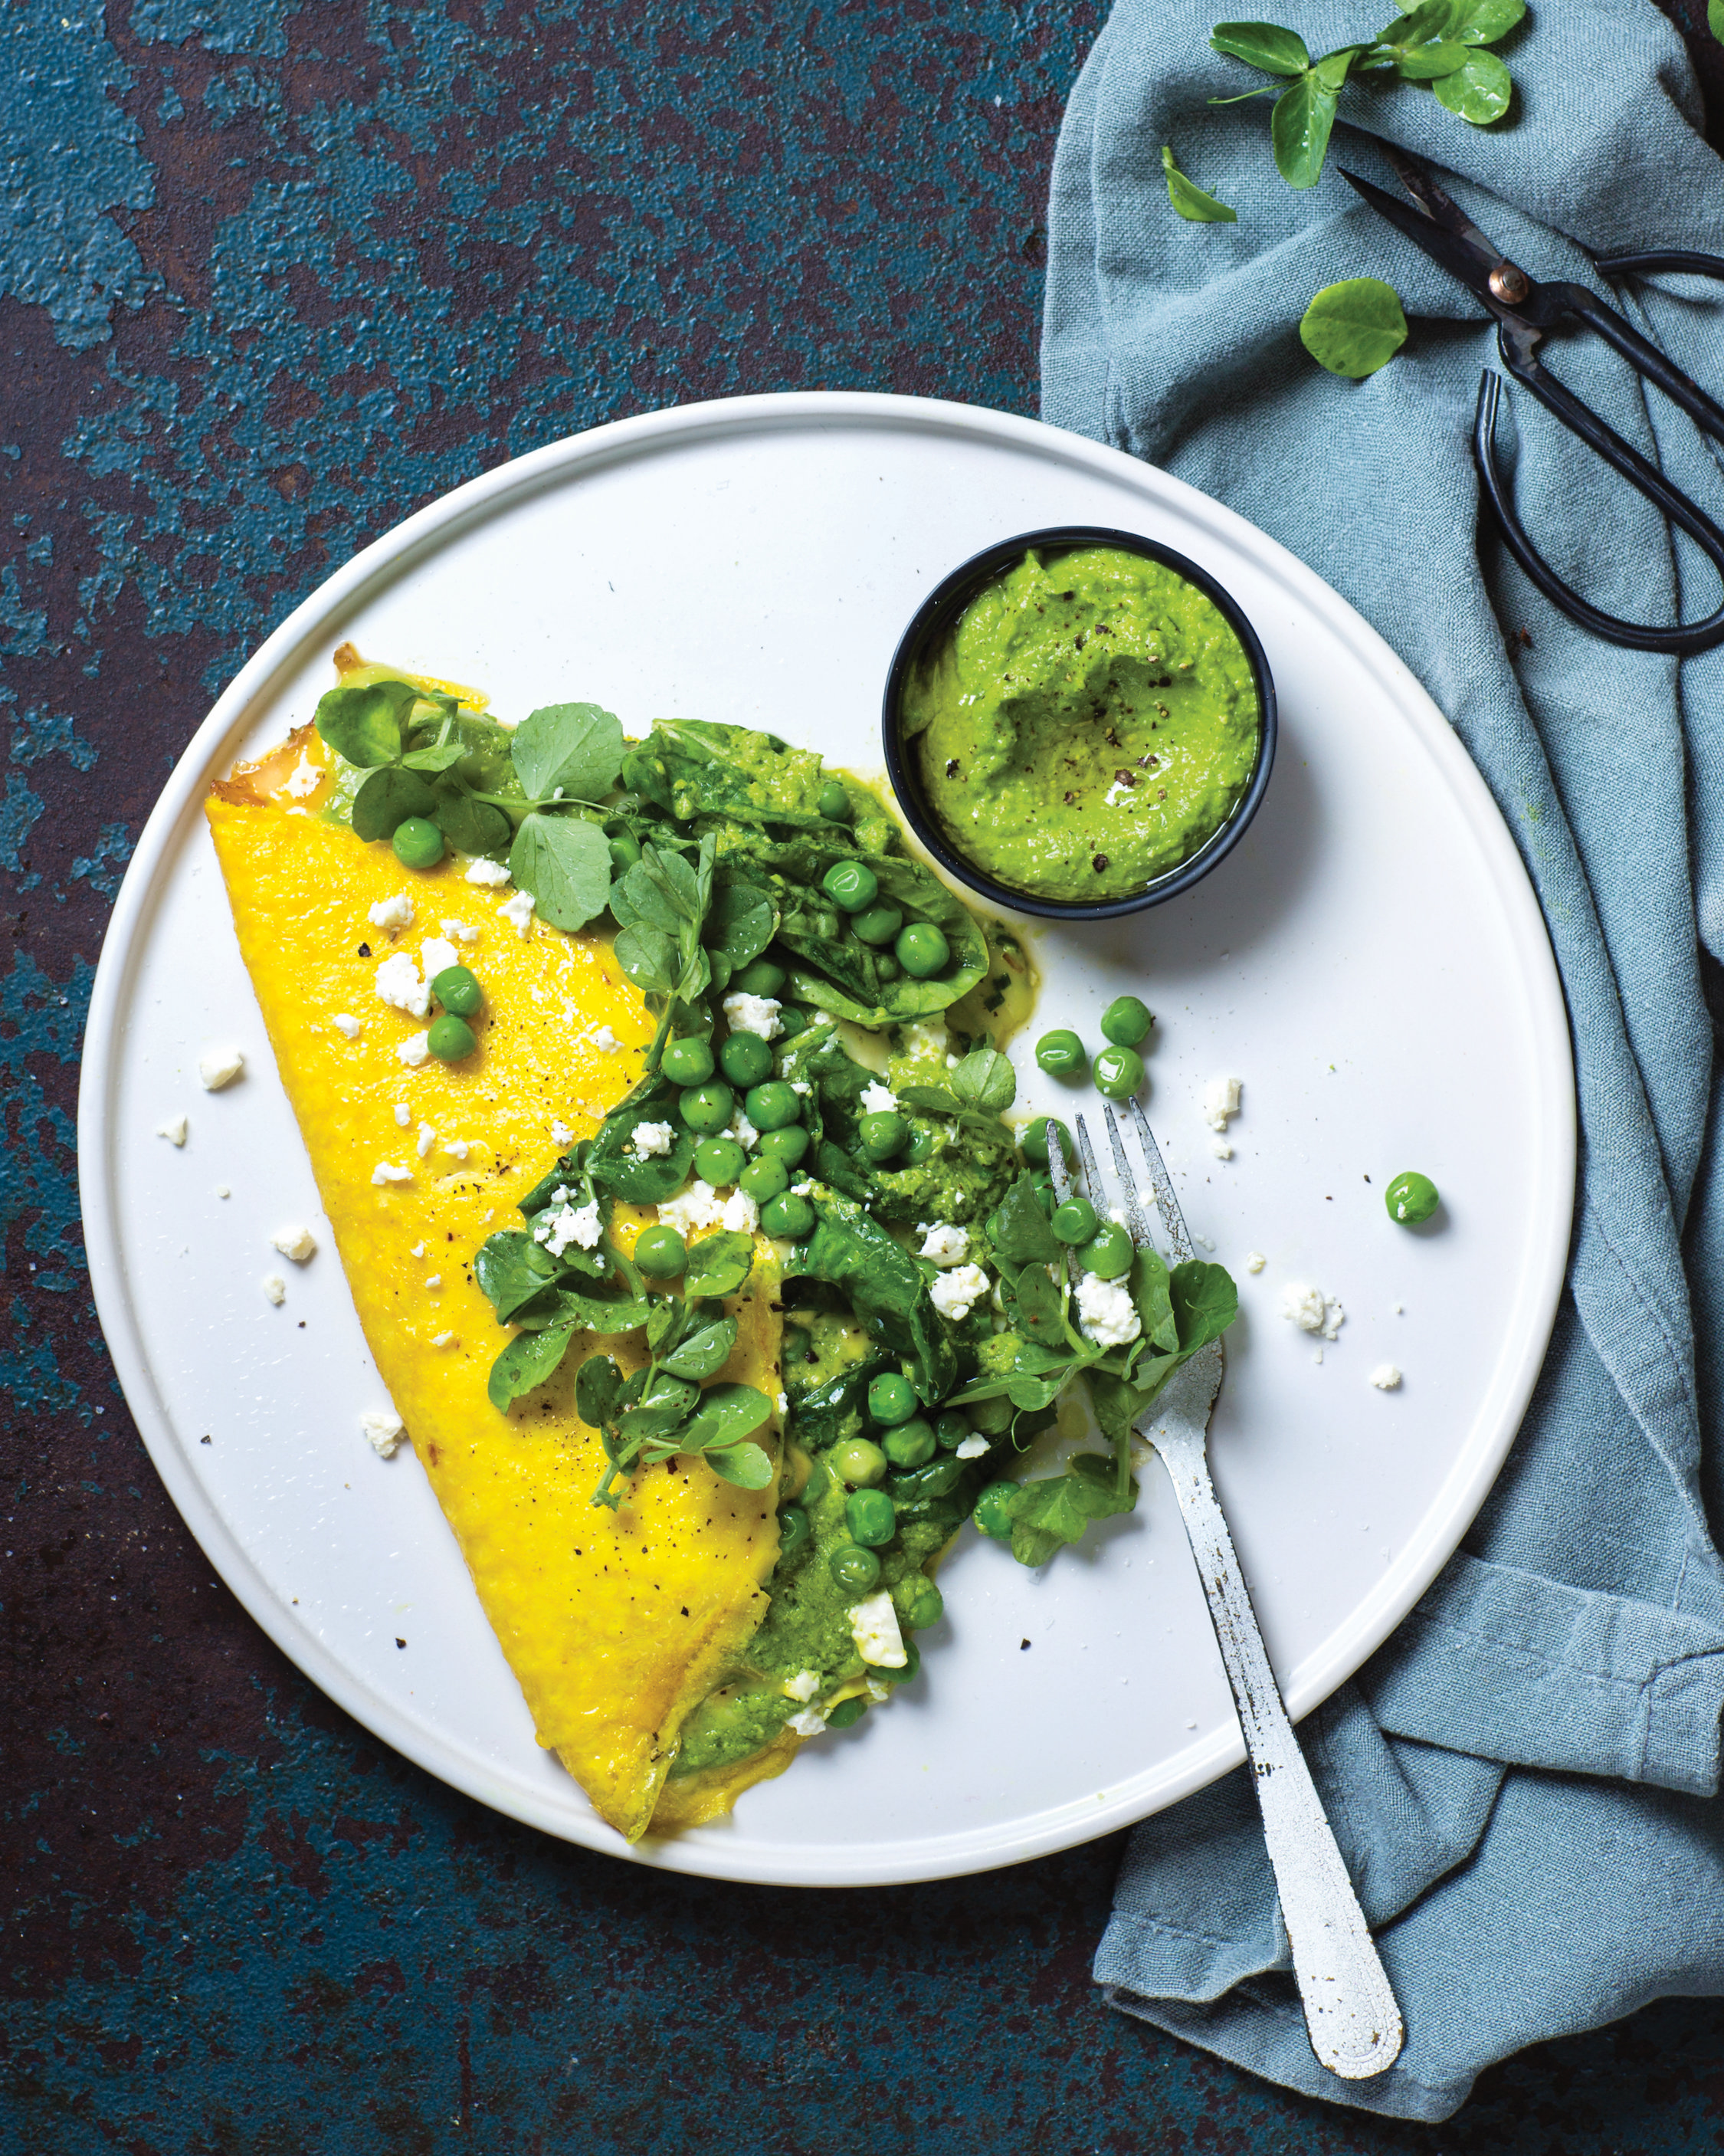 You are currently viewing Pea and spinach omelette with creamy pea sauce